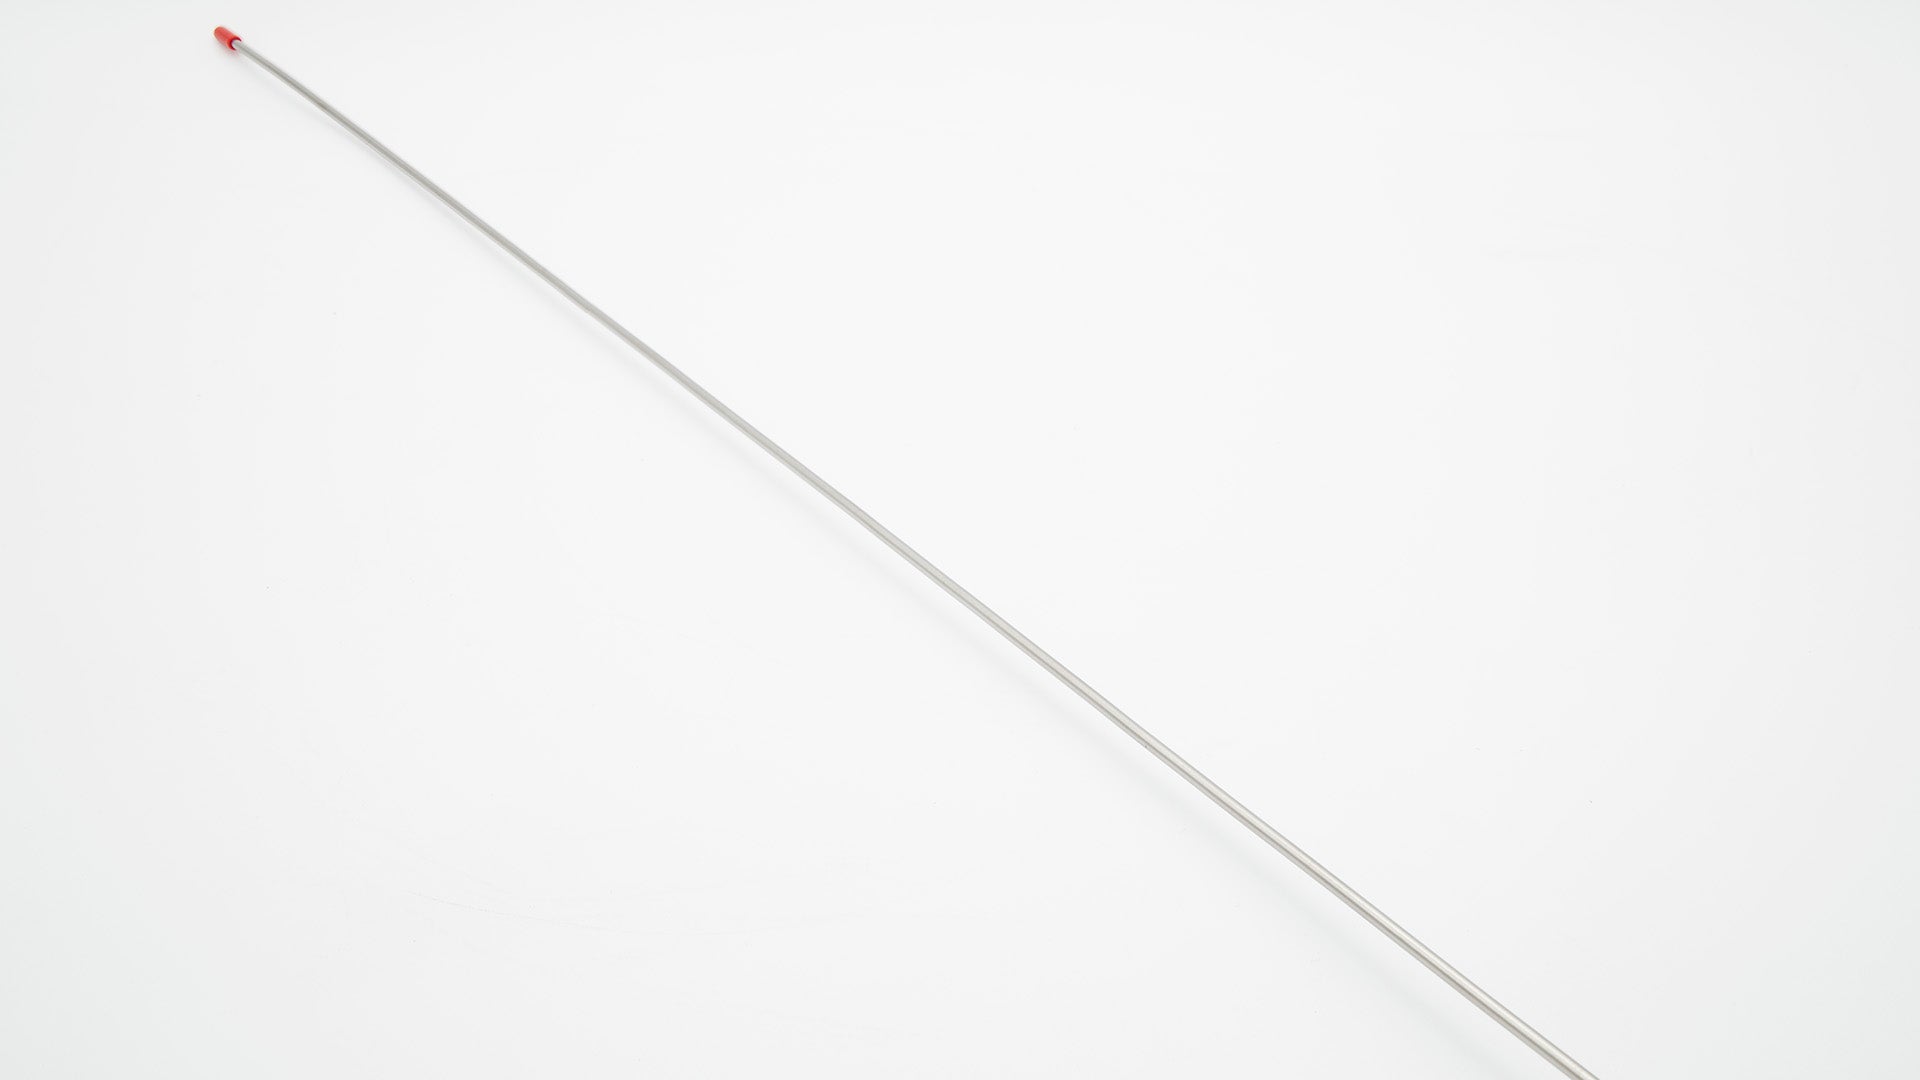 A long silver needle on a white surface